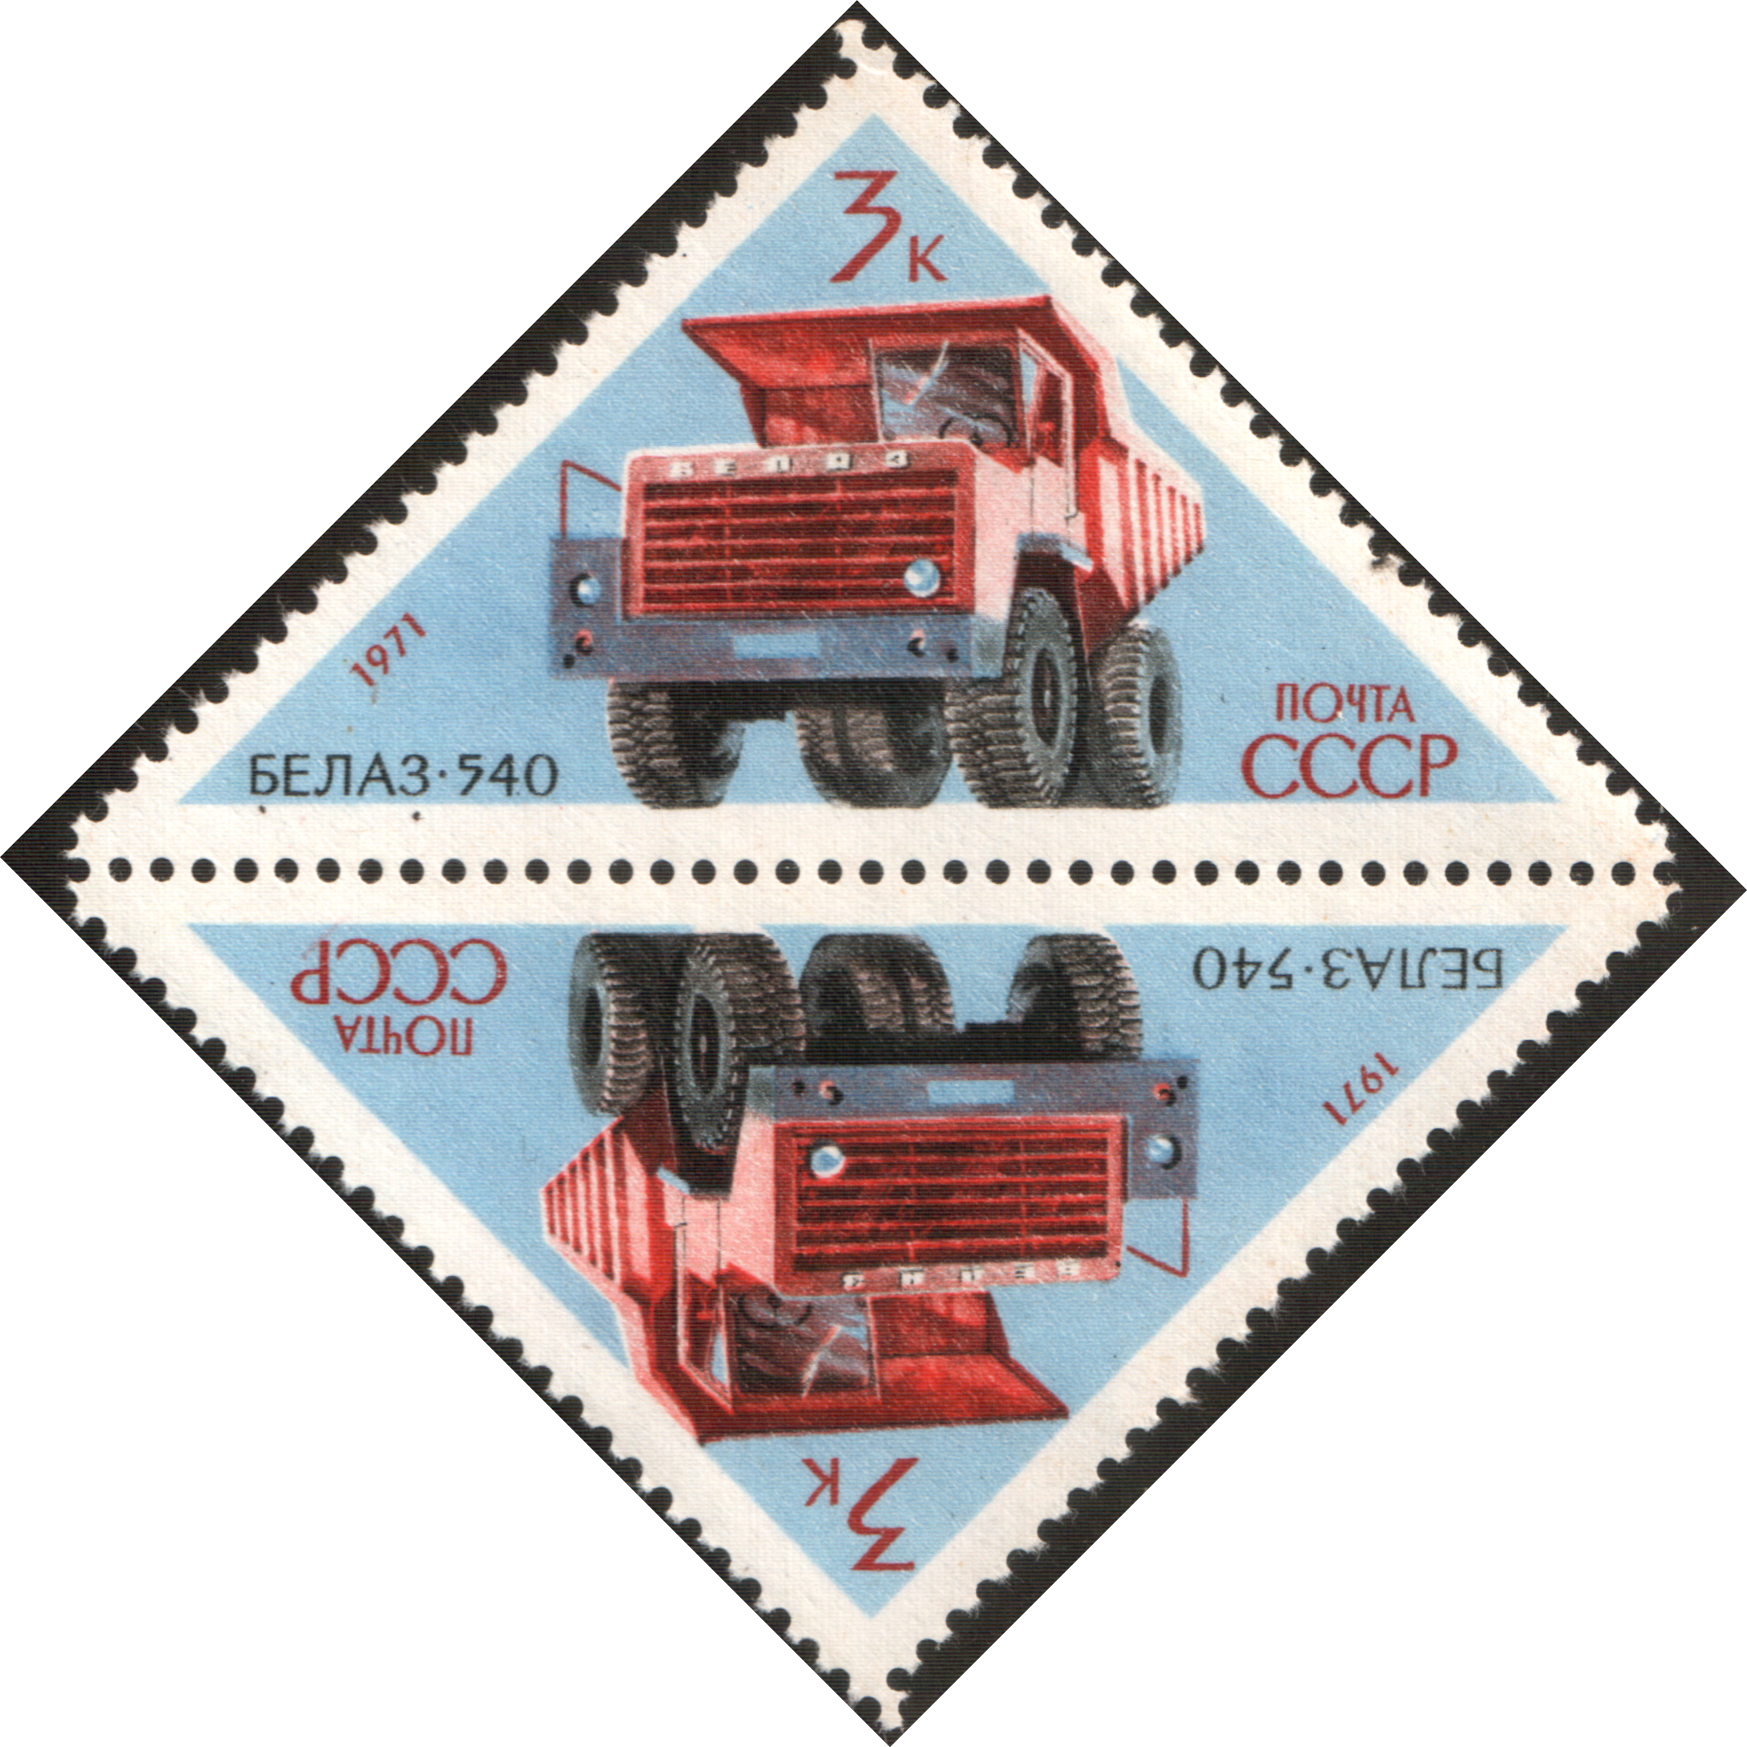 The Soviet Union 1971 Cpa 3999 Stamp - Postage Stamp (1747x1747), Png Download